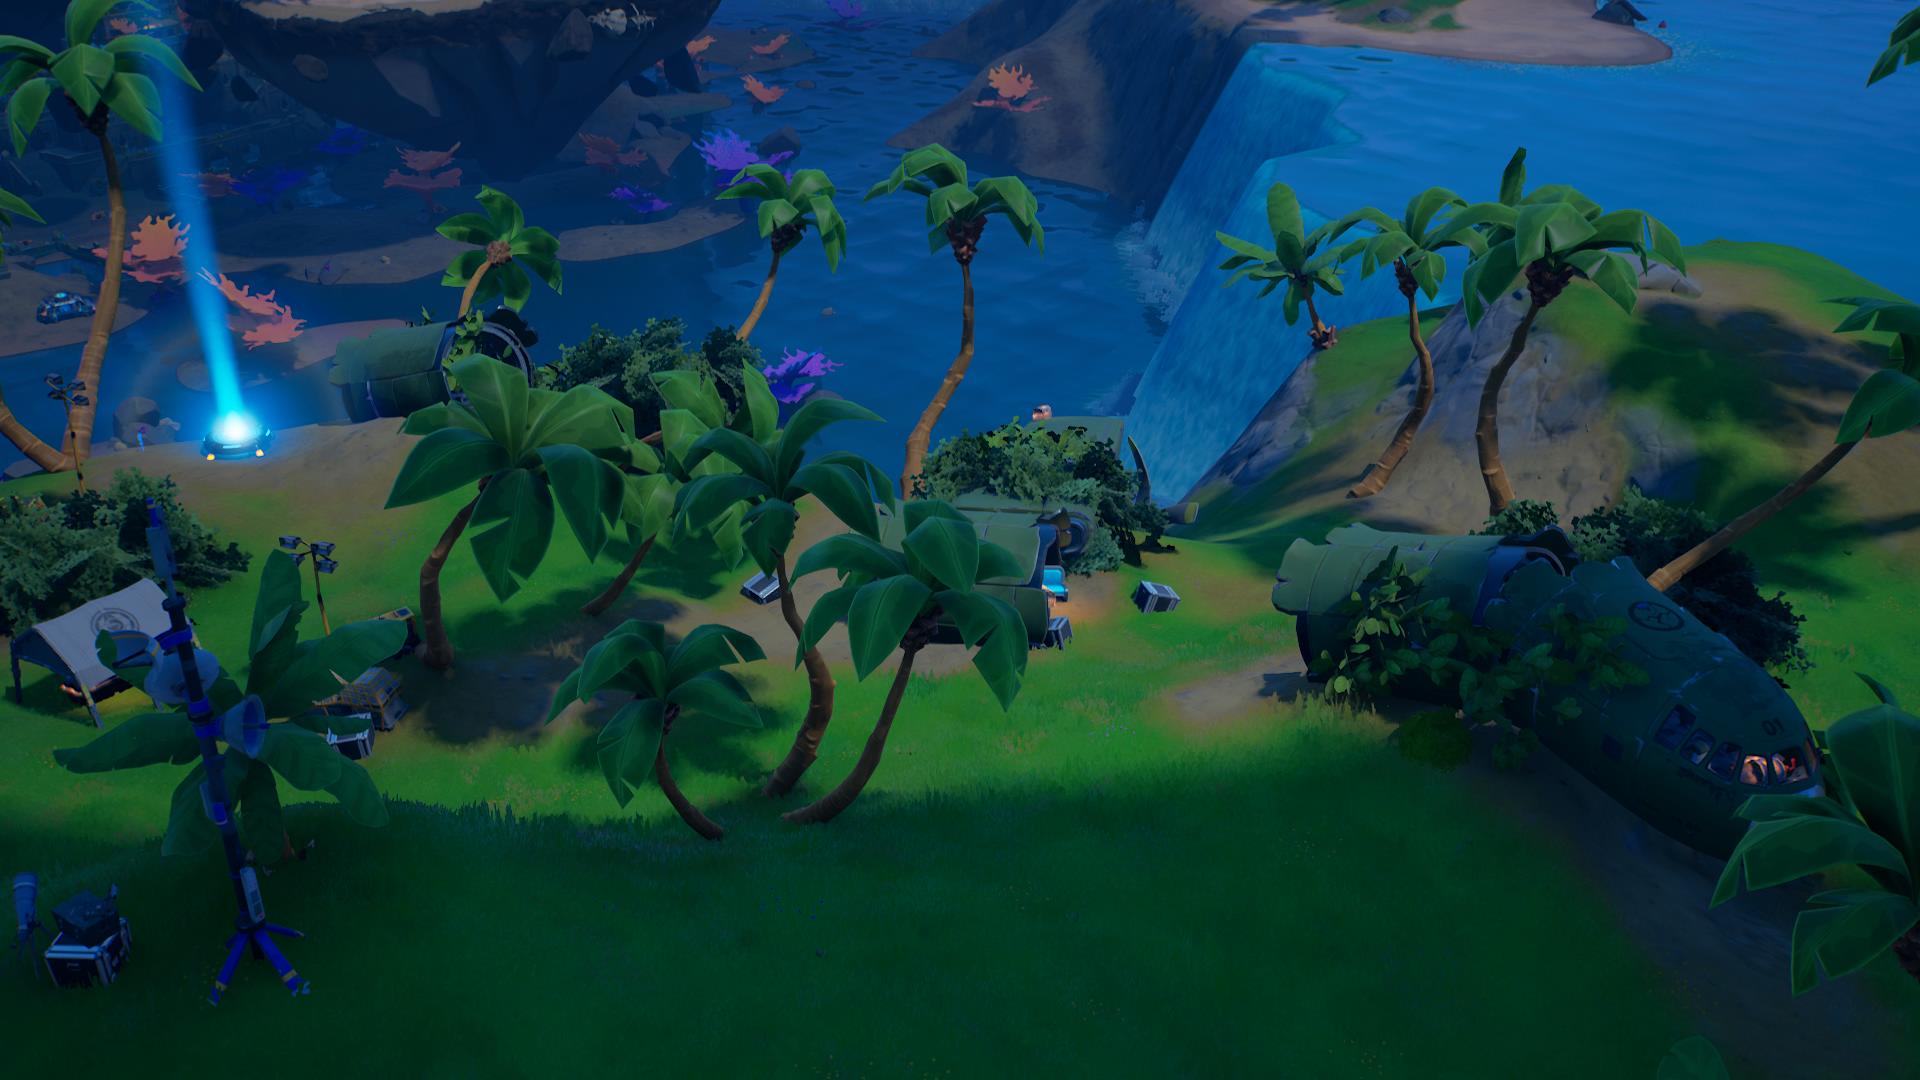 Fortnite Chapter 2 Season 8 will have 3 new locations 